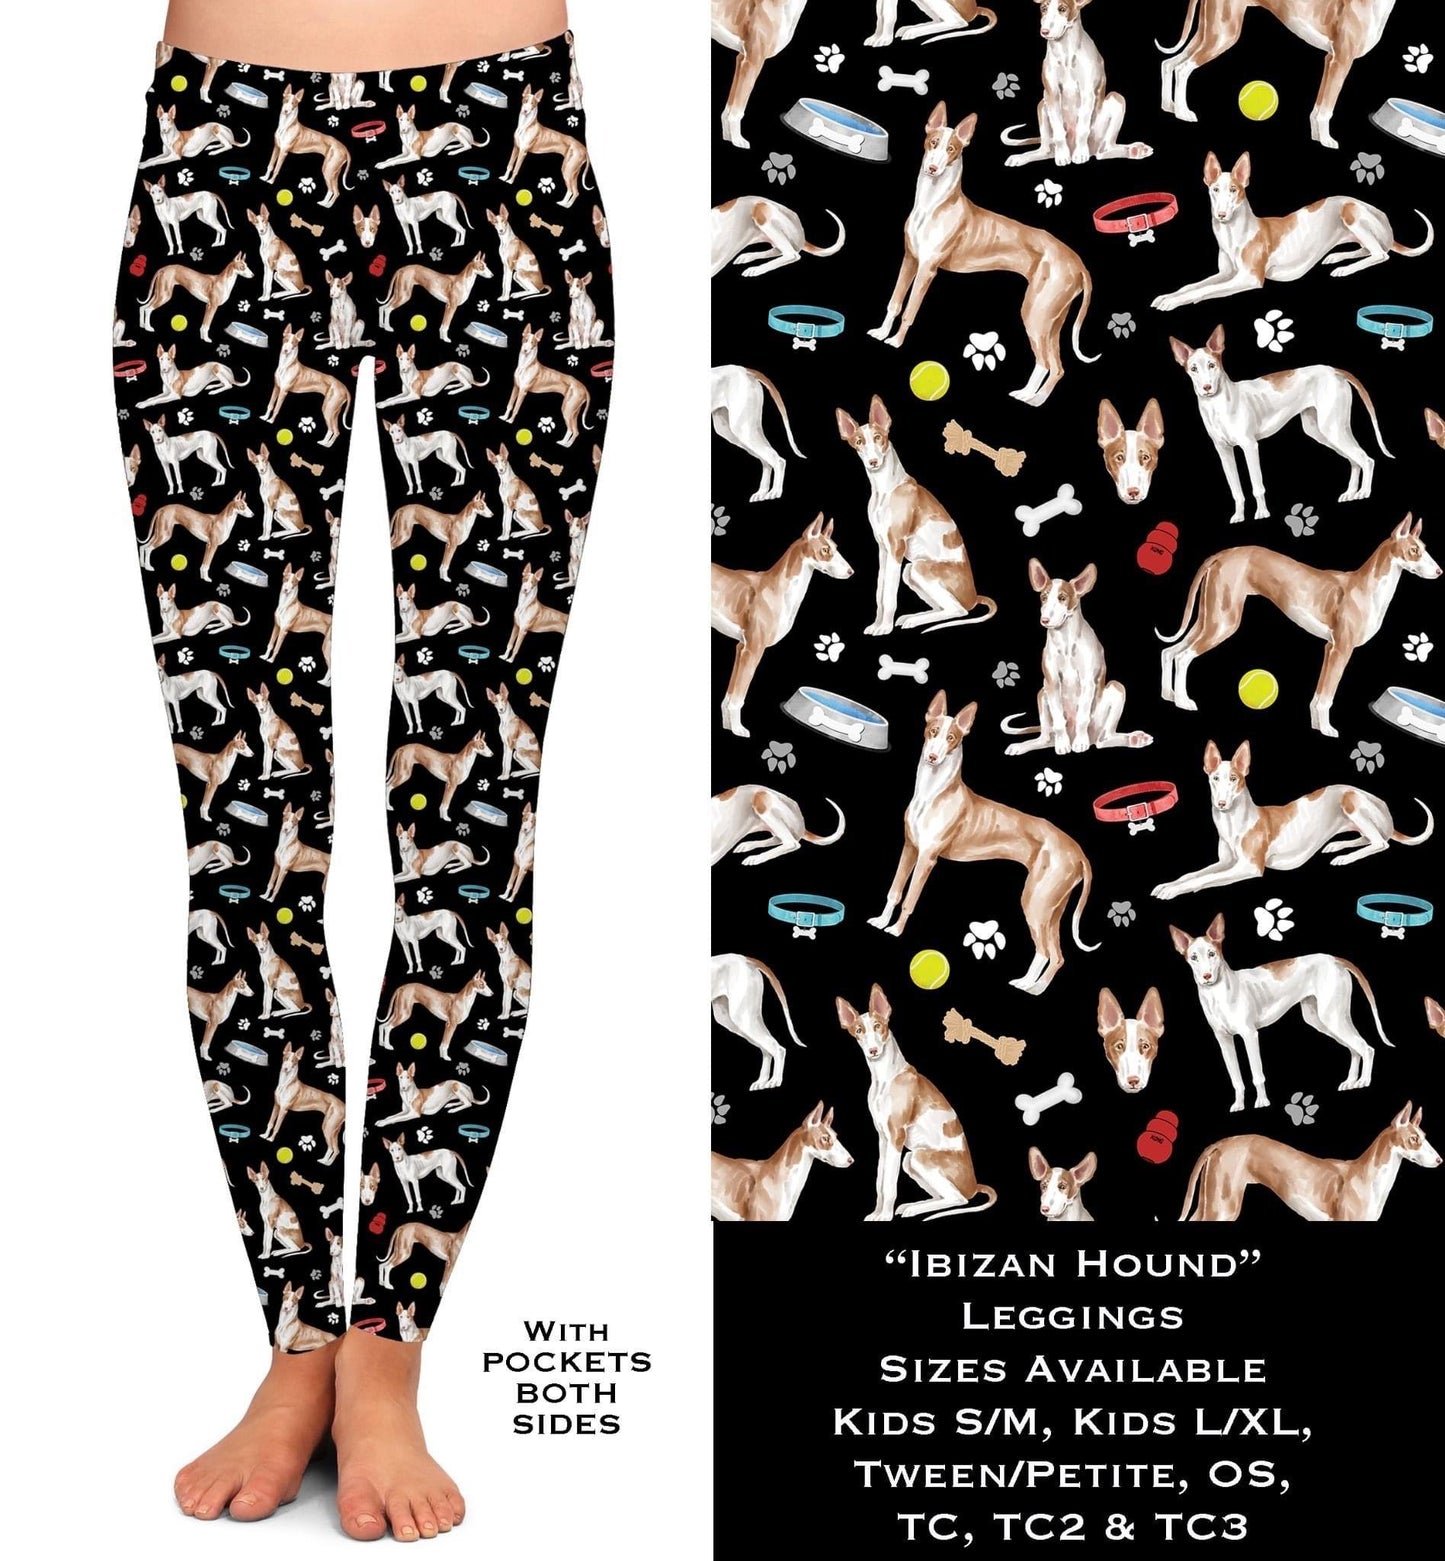 Ibizan Hound Leggings with Pockets - That’s So Fletch Boutique 